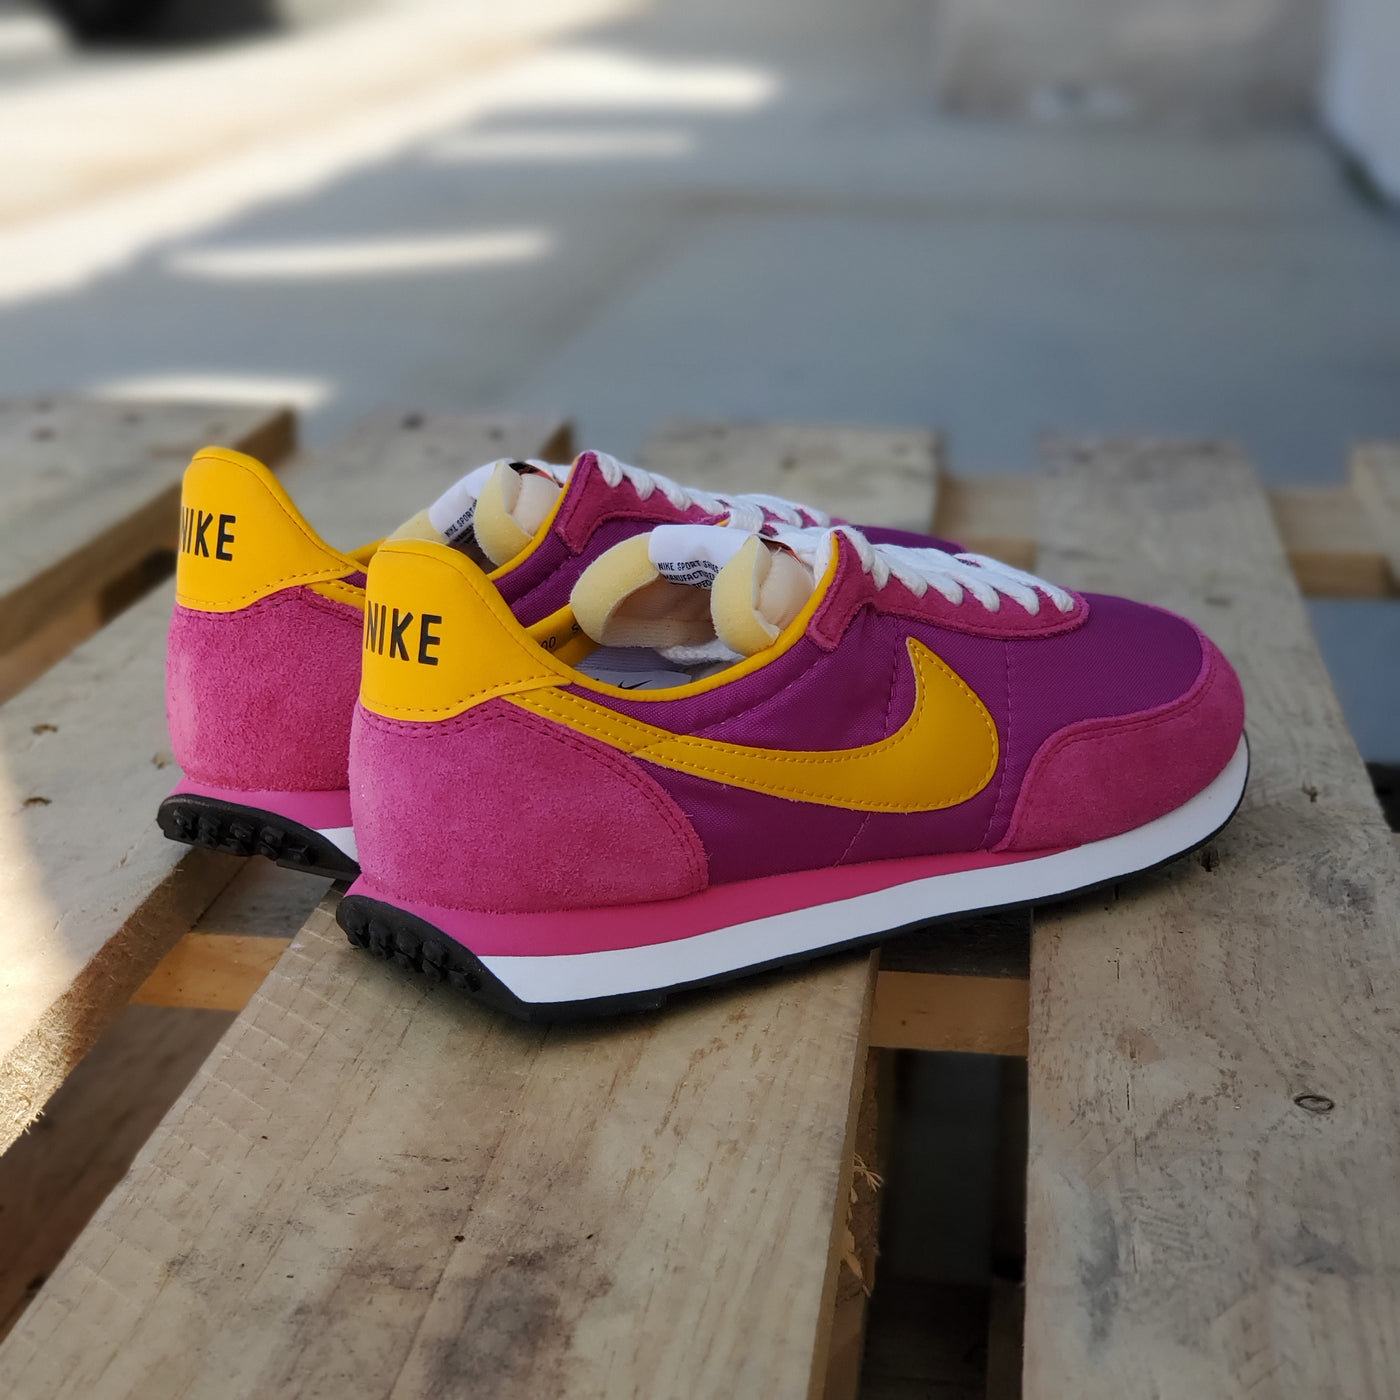 Nike Waffle Trainer 2 SP Fireberry Release Date